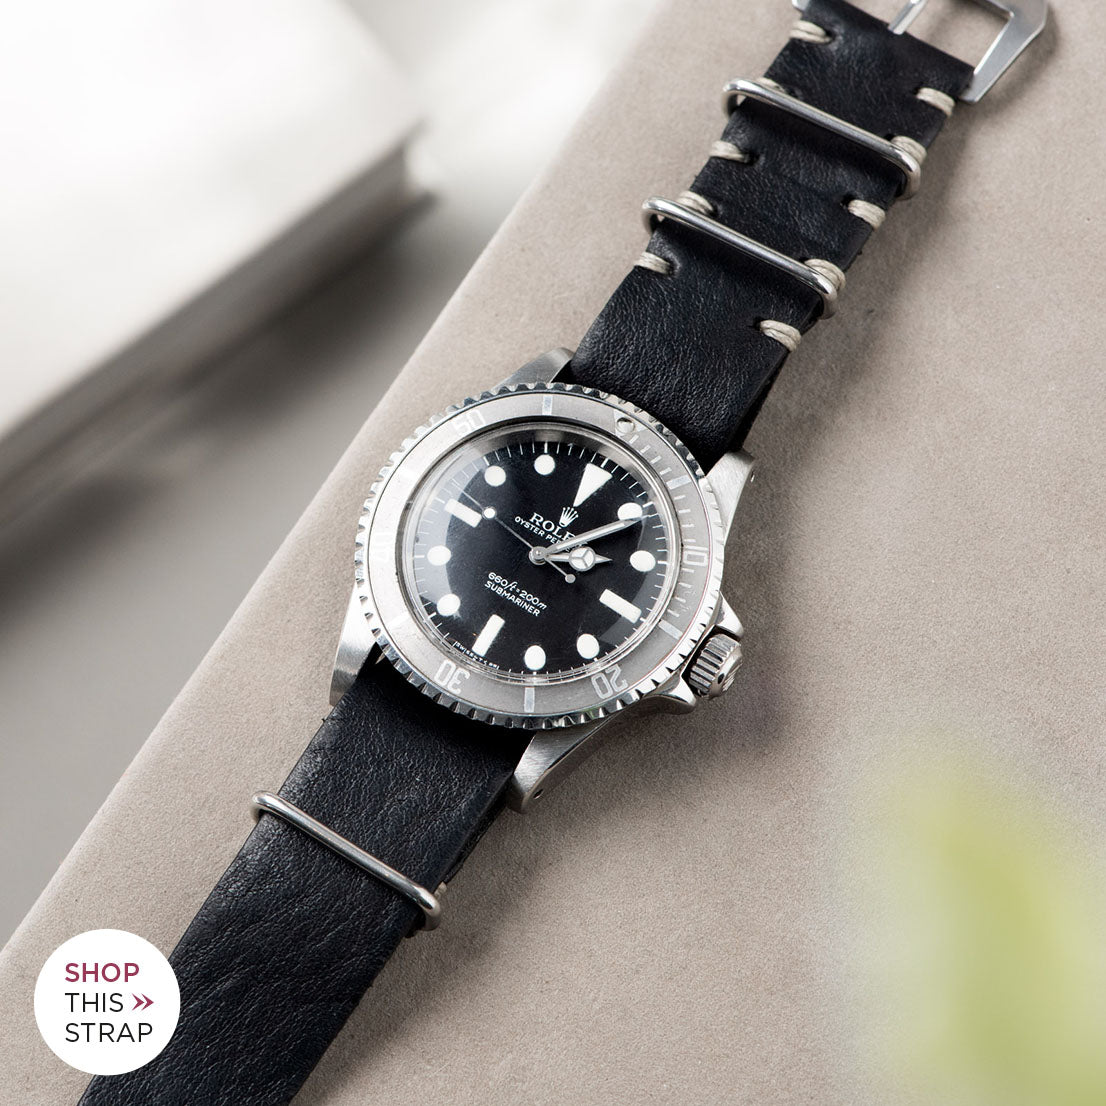 Bulang and Sons_Strap Guide_The Rolex 5513 Faded Maxi Submariner_Black Nato Leather Watch Strap